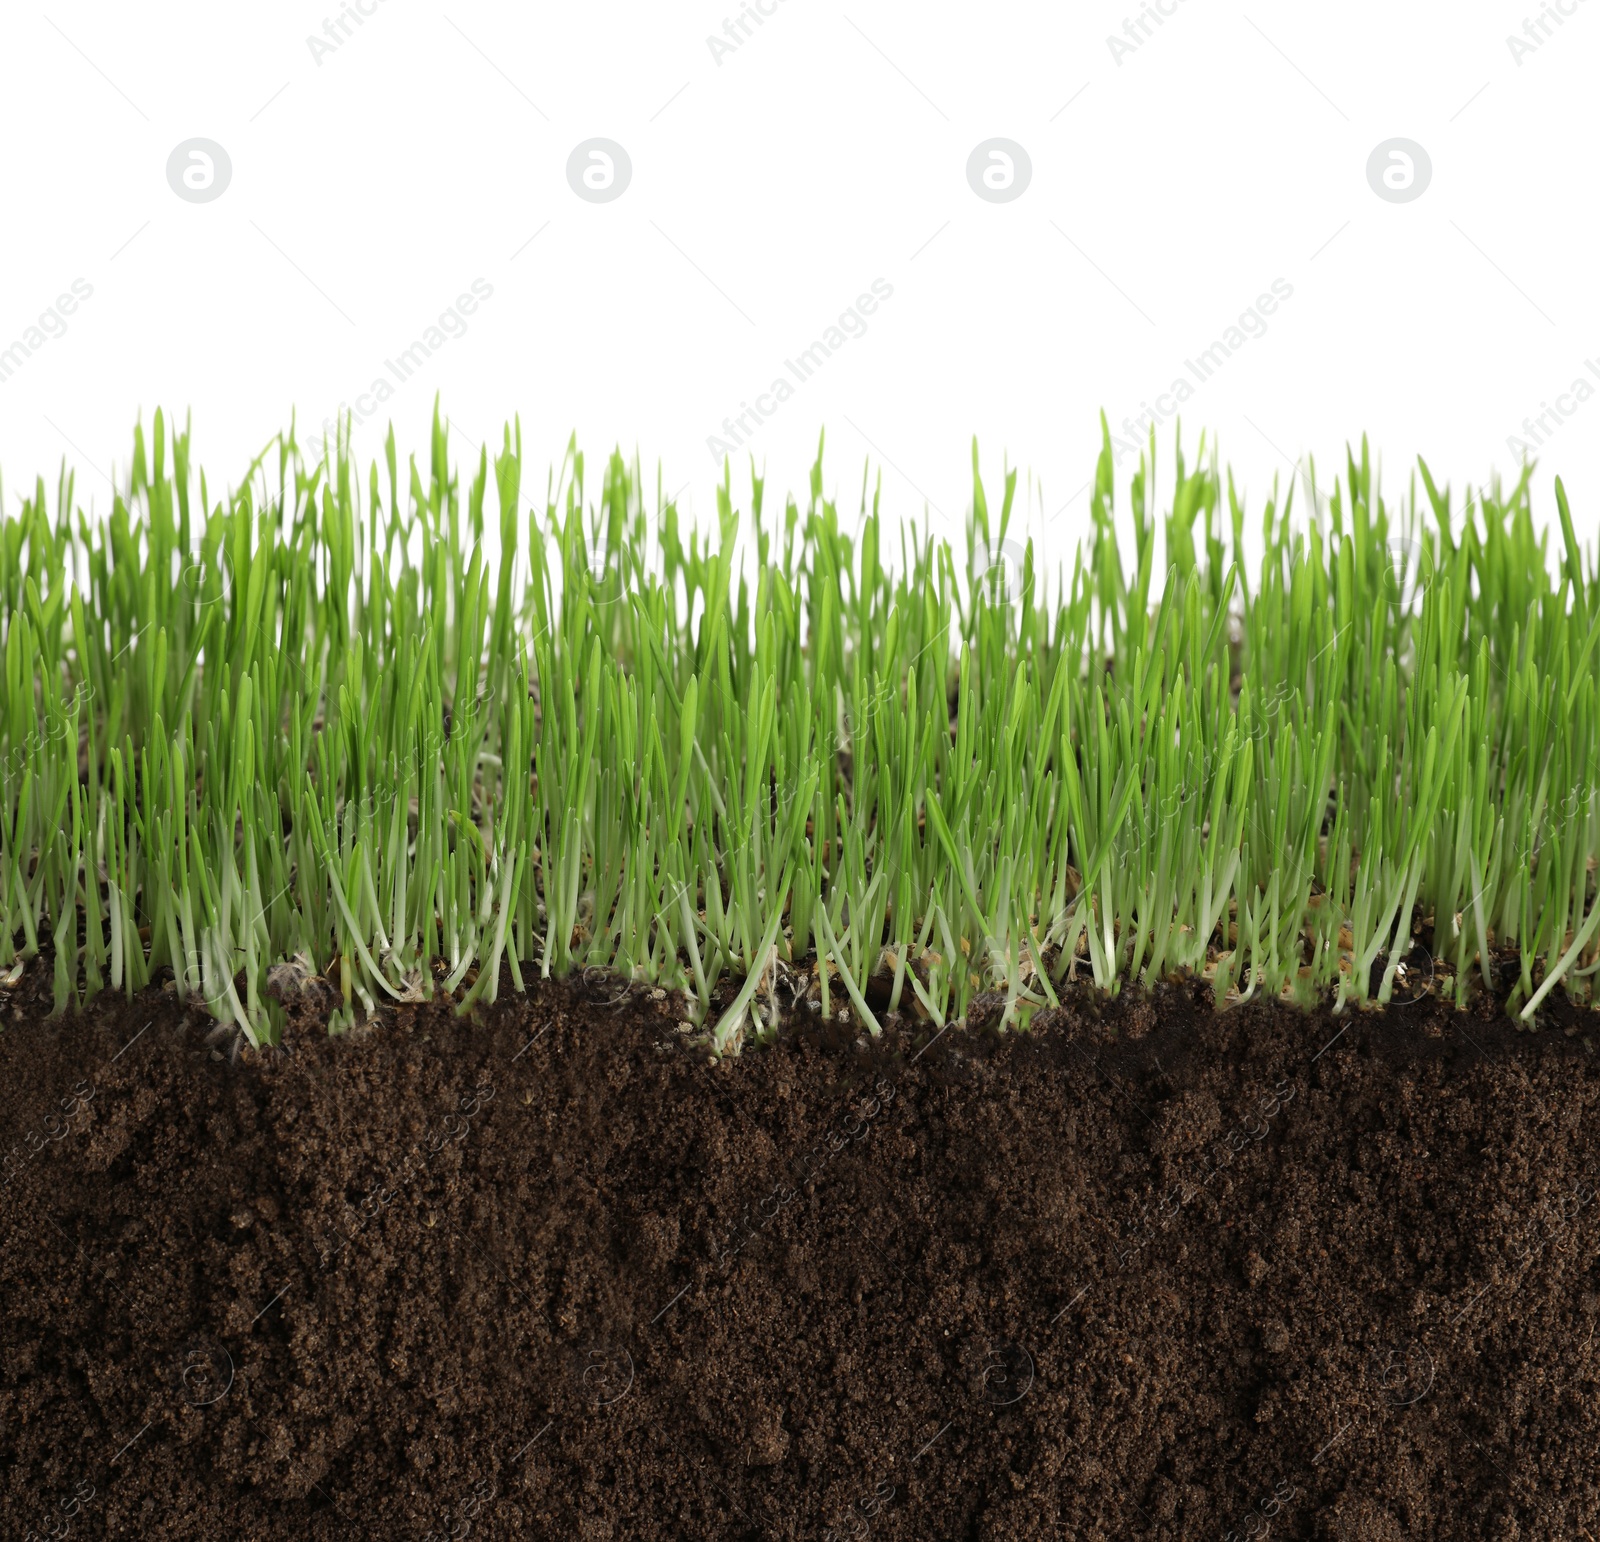 Image of Soil with lush green grass on white background